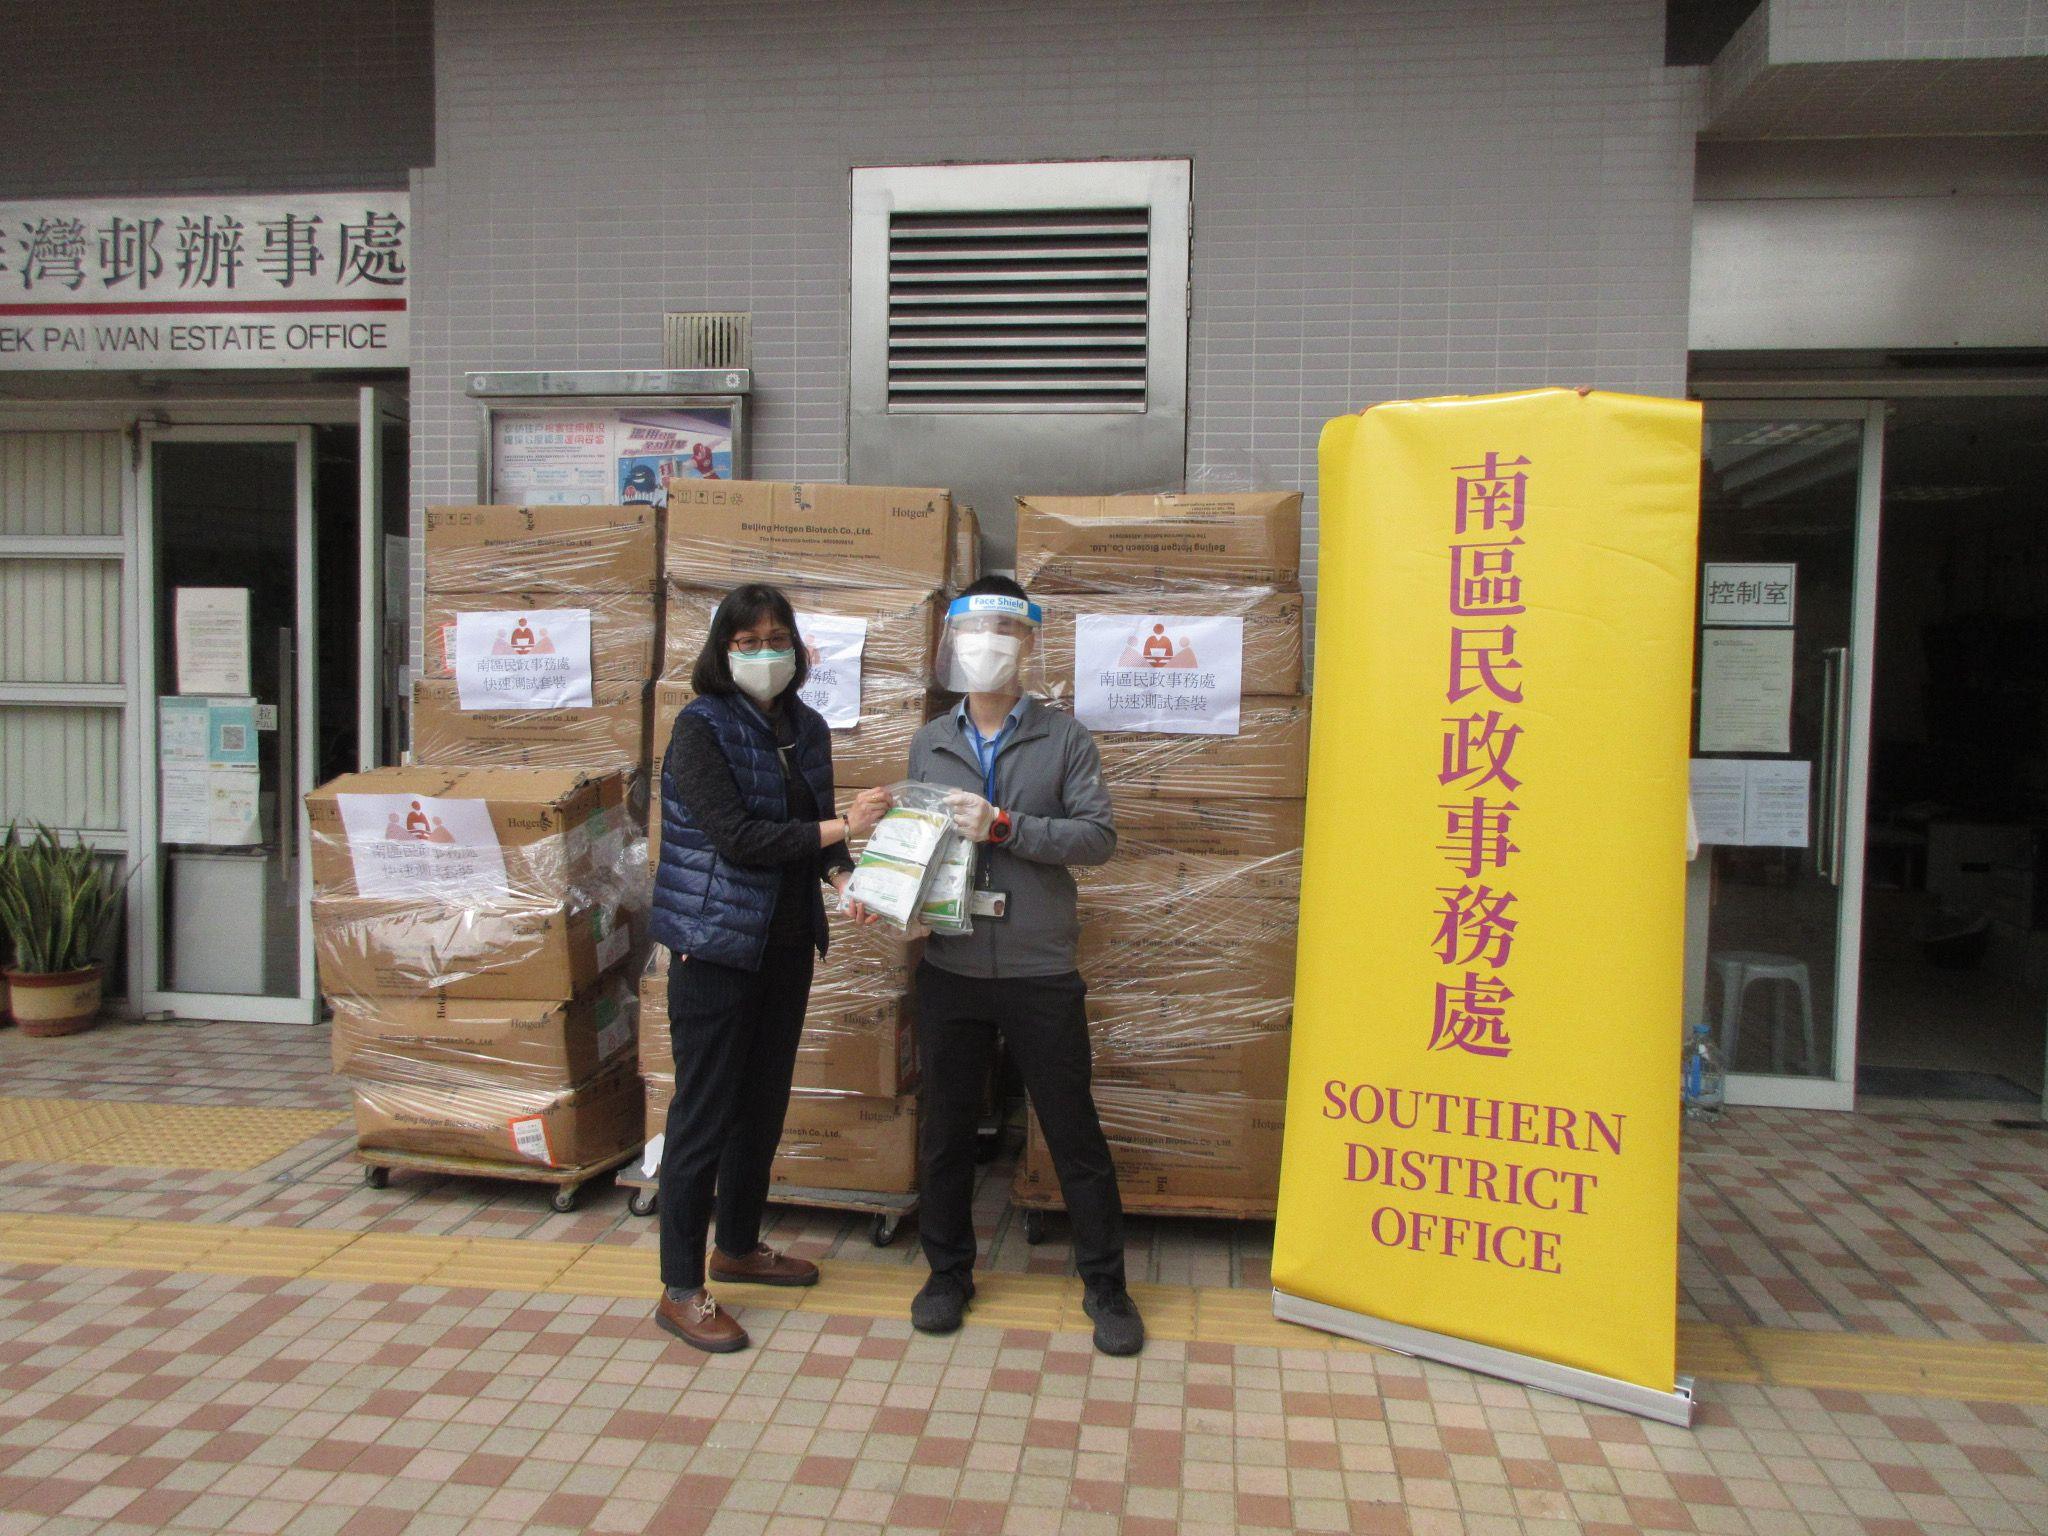 The Southern District Office today (March 7) distributed COVID-19 rapid test kits to households, cleansing workers and property management staff living and working in Shek Pai Wan Estate for voluntary testing through the property management company.